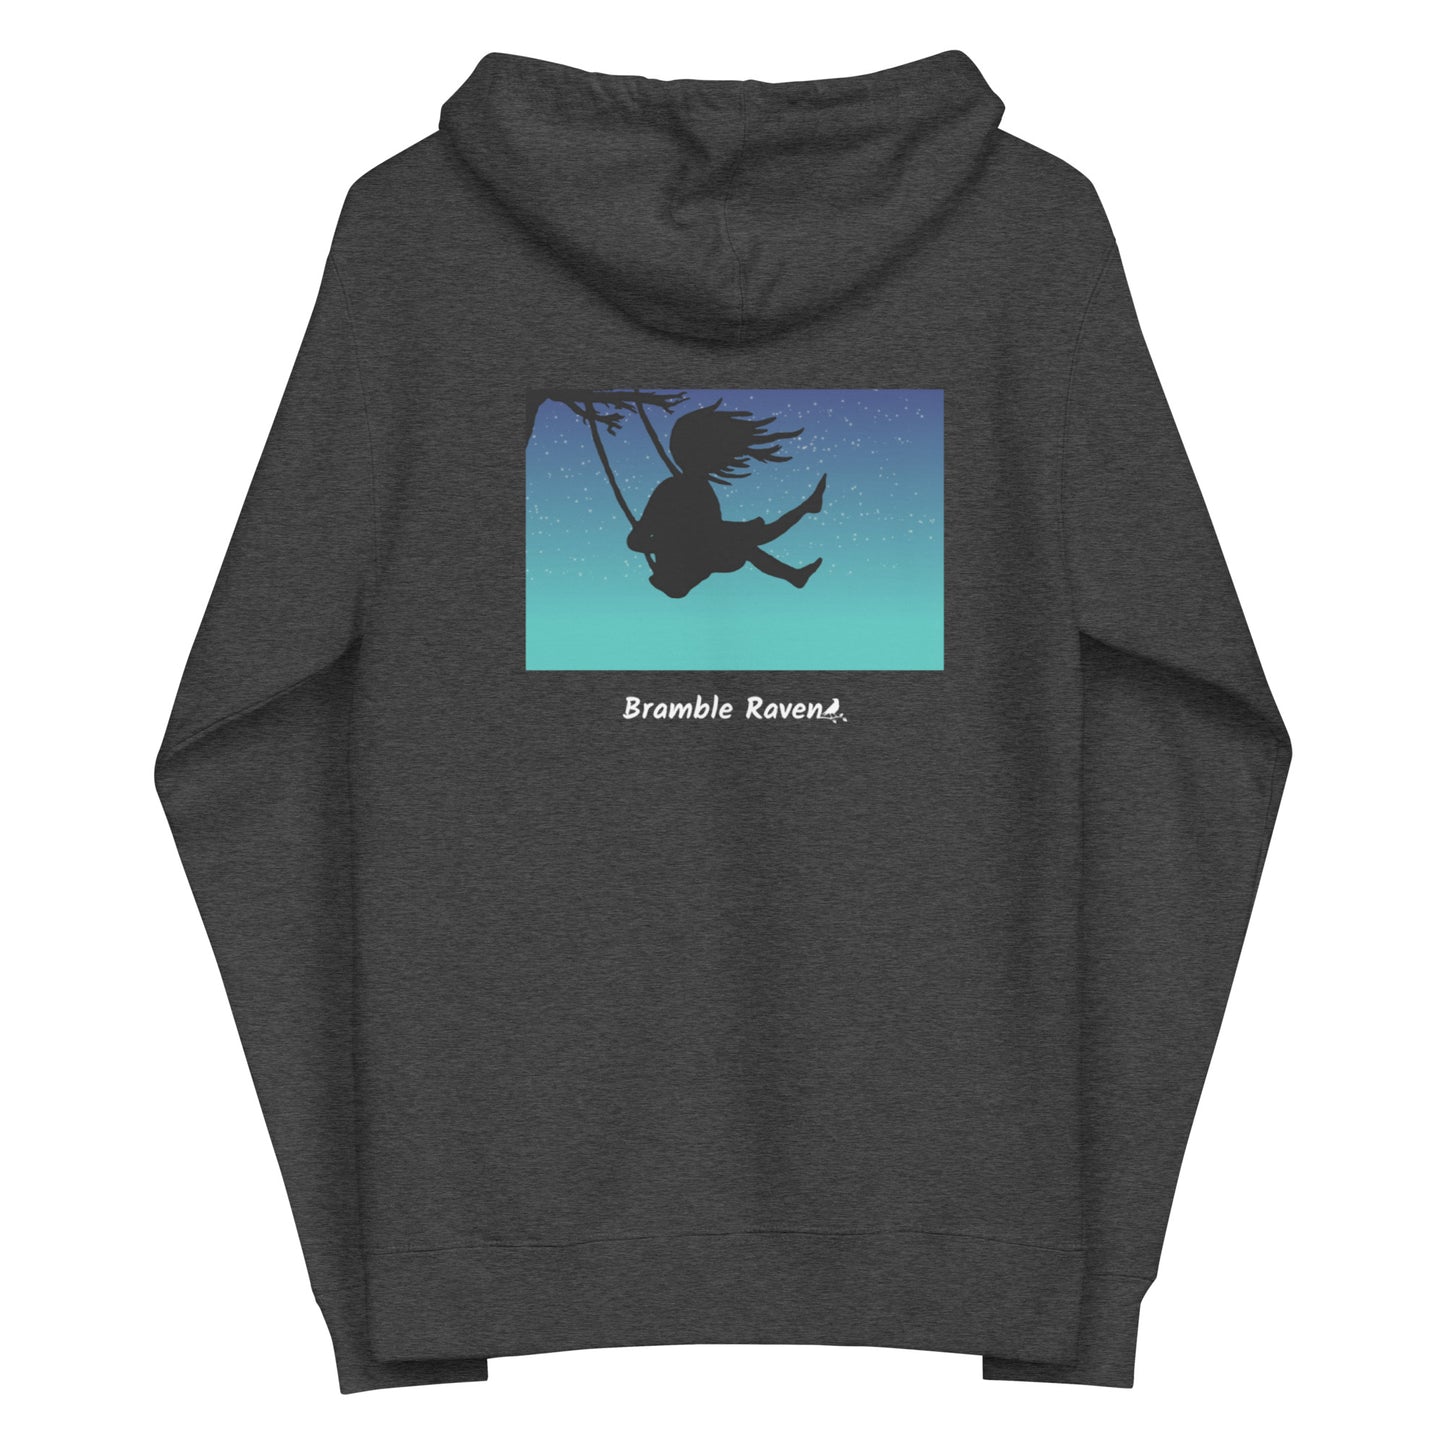 Original Swing Free design of a girl's silhouette in a tree swing against the backdrop of a blue starry sky. Rectangular image on the back of a unisex fleece-lined charcoal heather grey colored zip up hoodie.